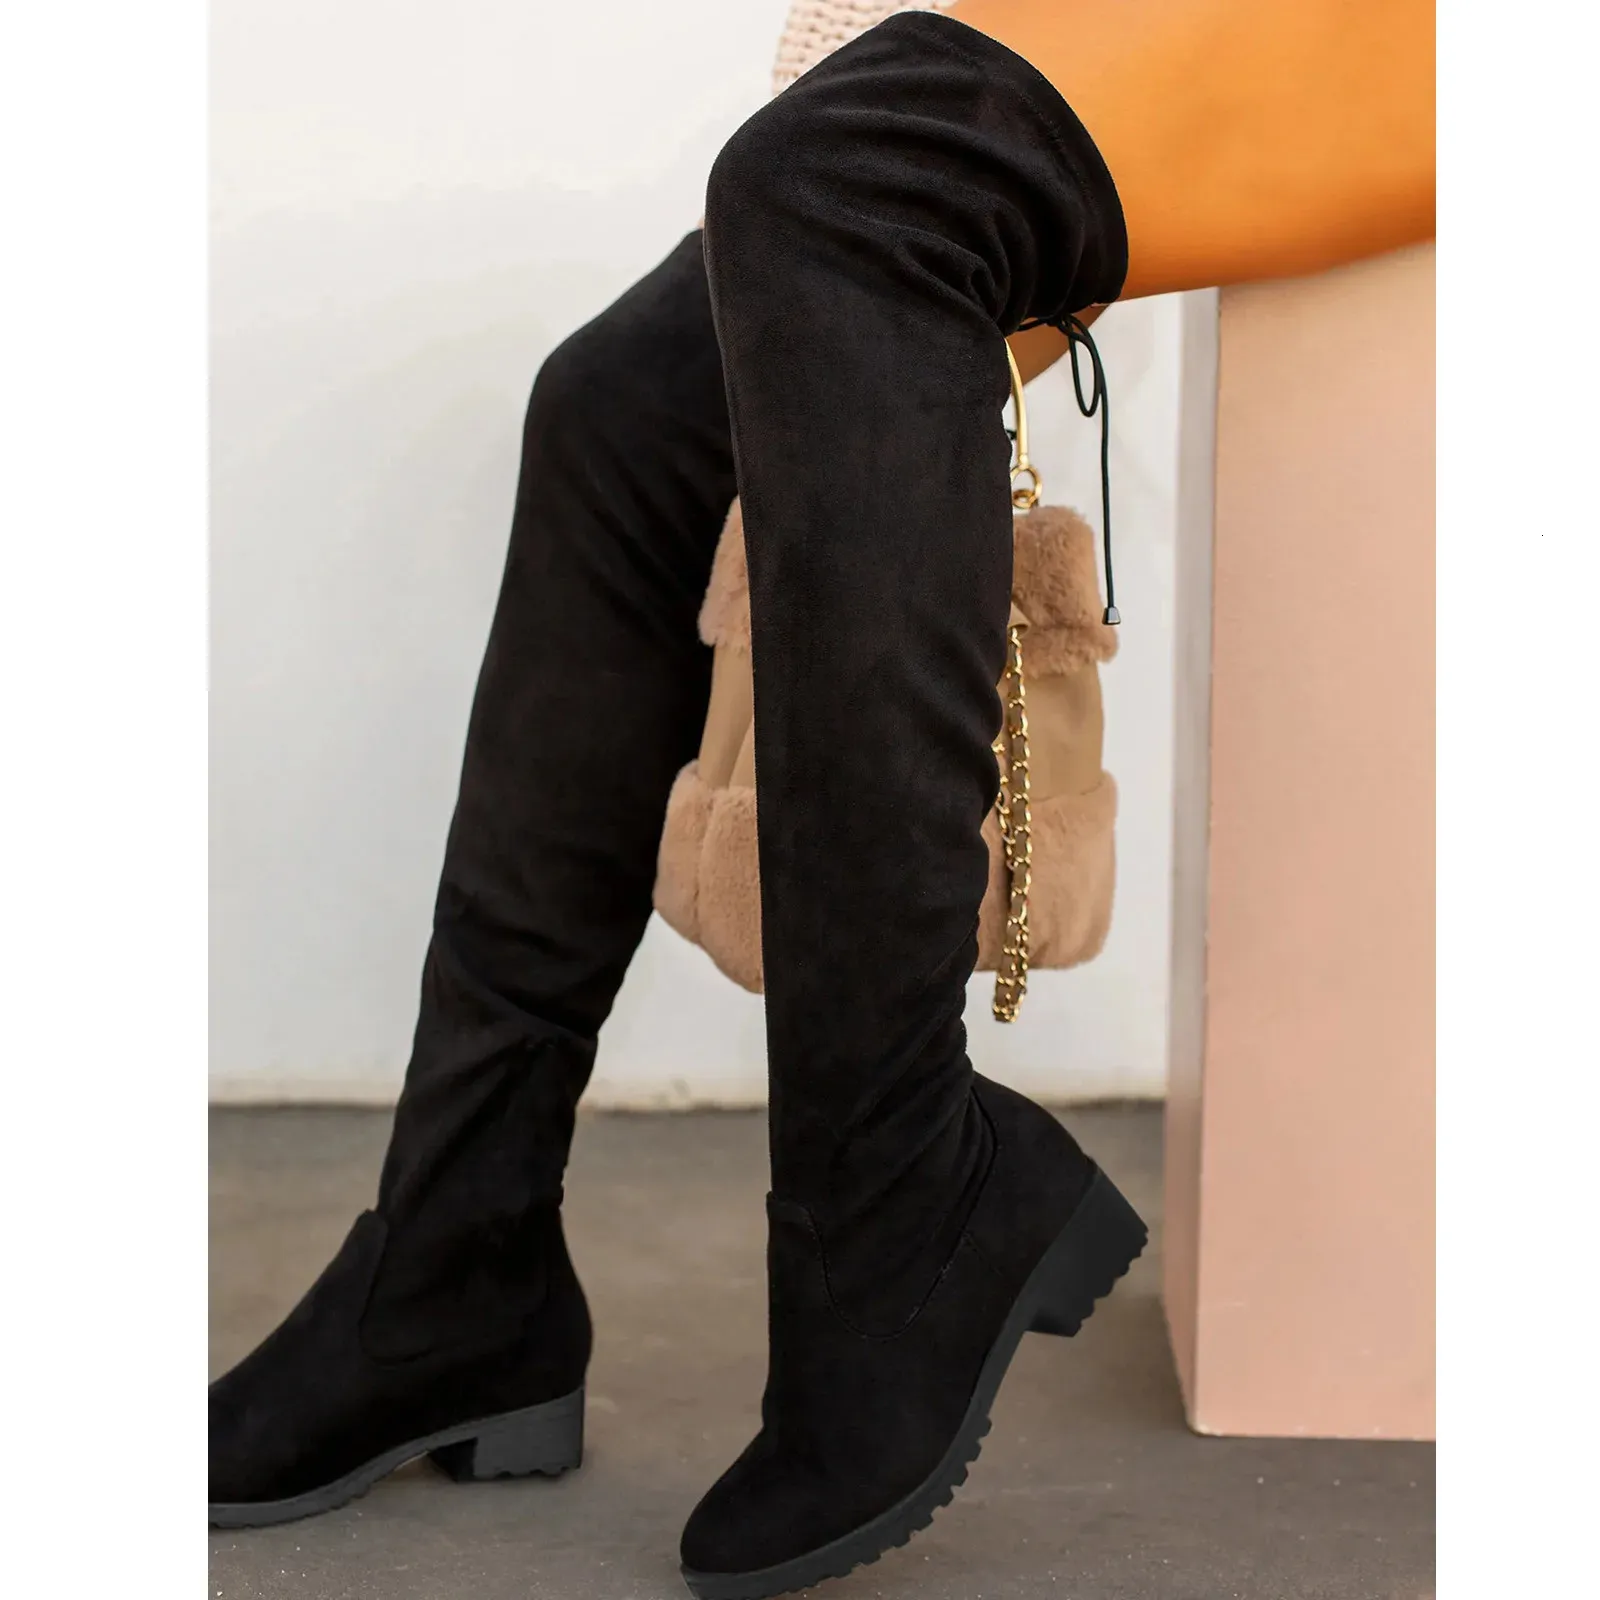 Faux Suede Square Heels Elastic Knee-high Boots for Women Tube Lace-up Slim Velvet Warm Thigh High Boots Black Botas Mujer 240411